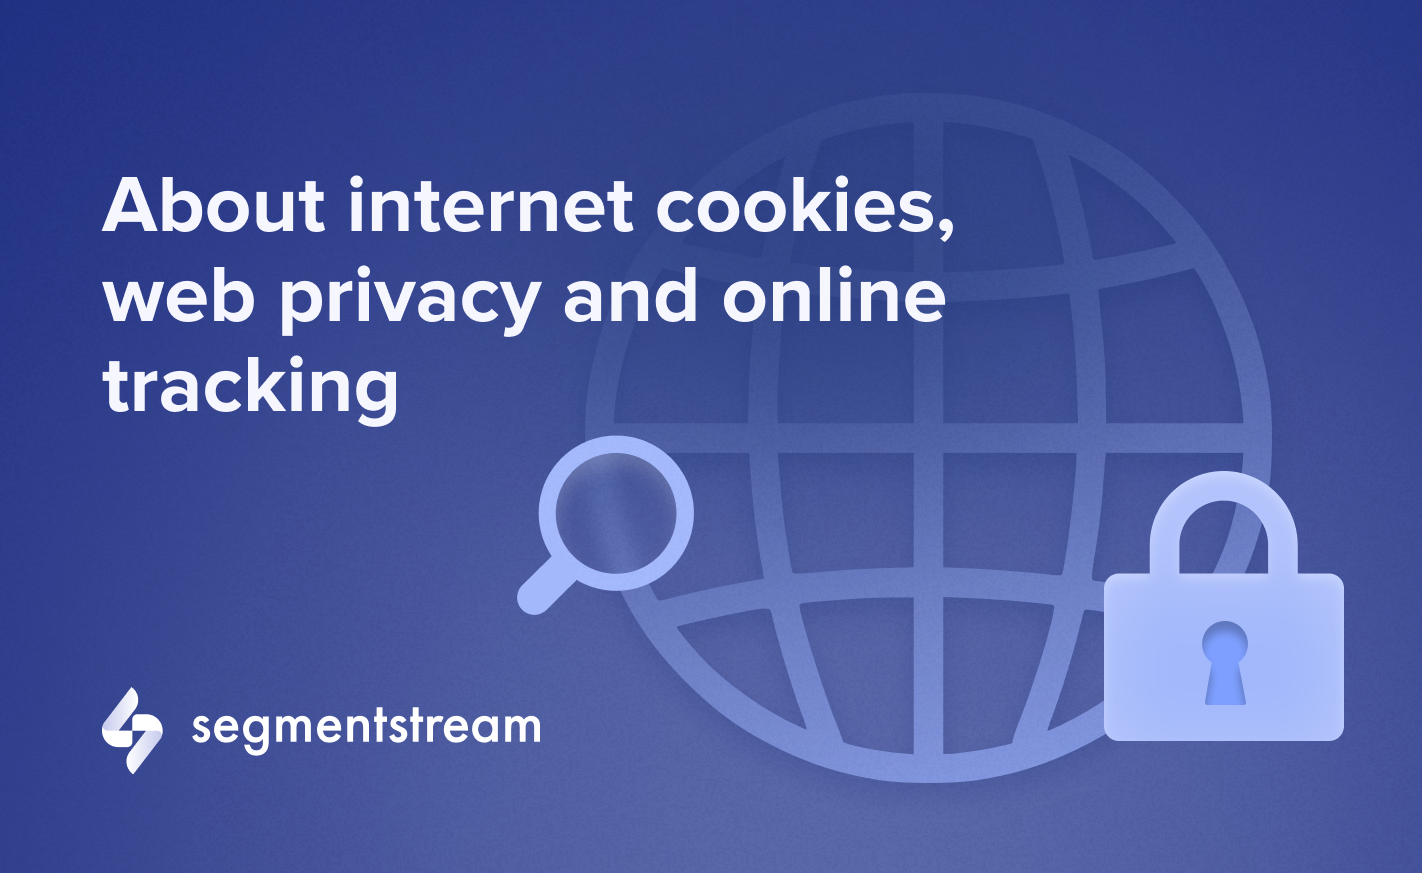 About internet cookies, web privacy and online tracking